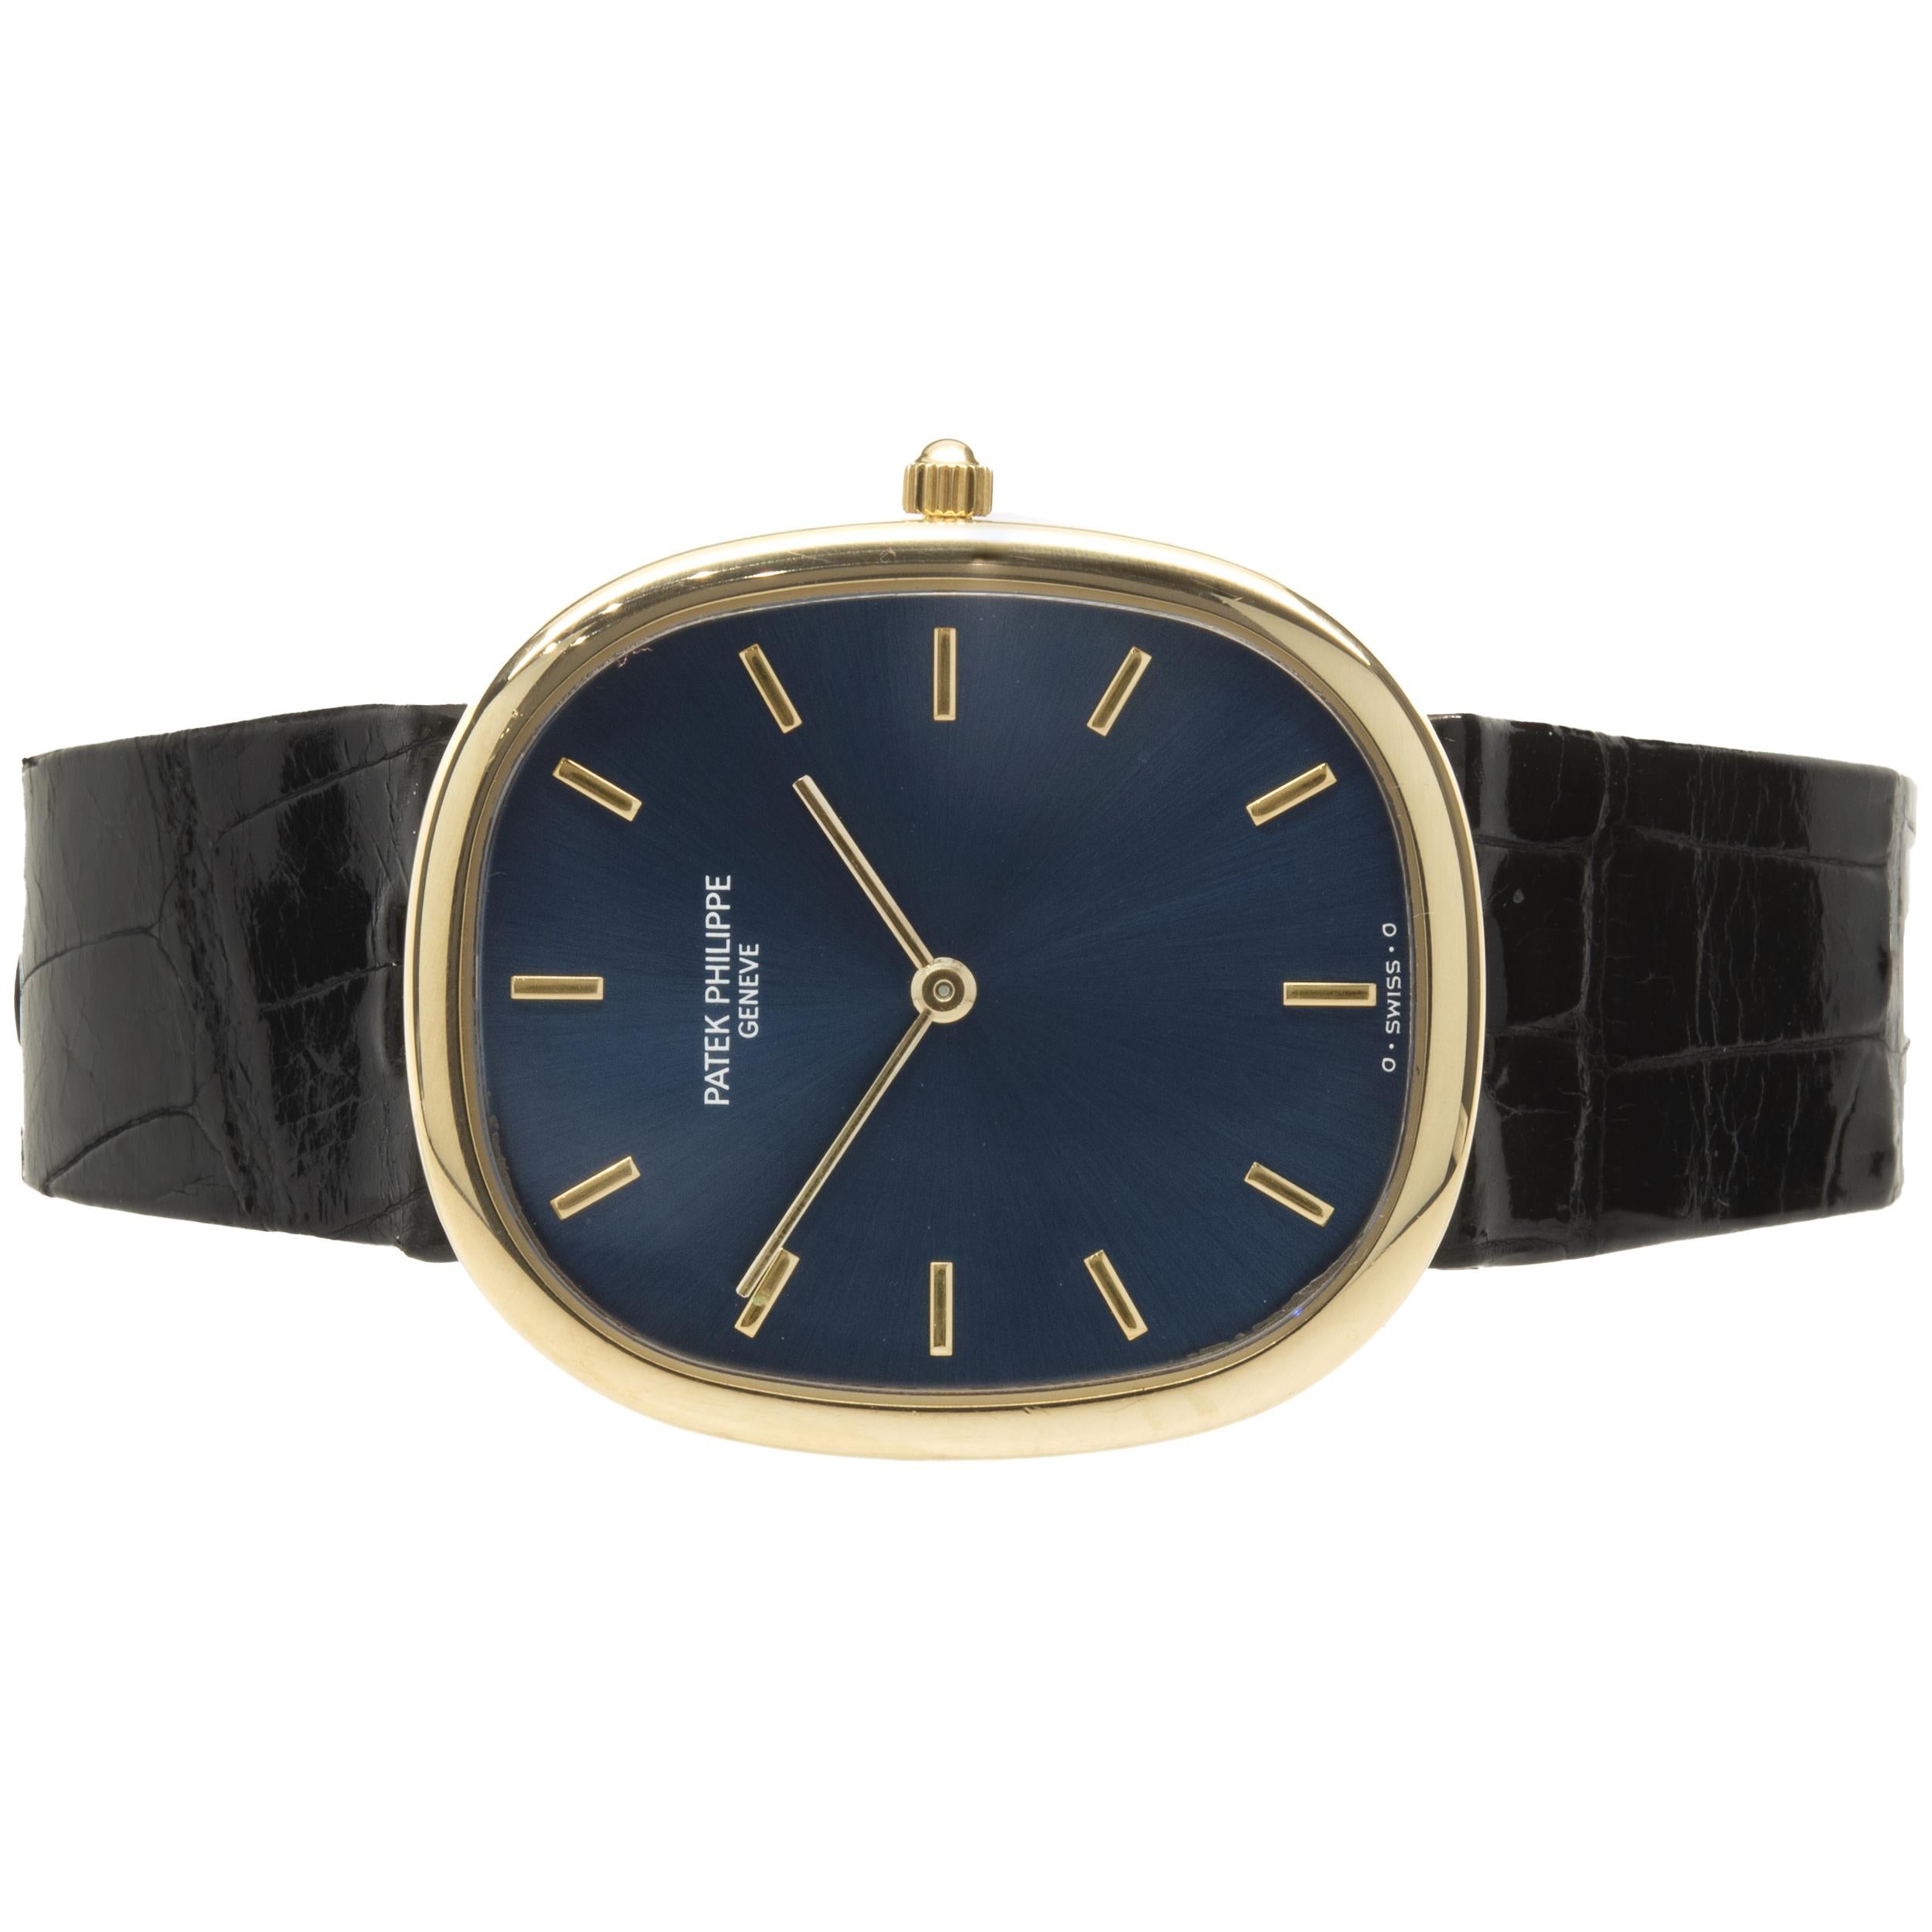 Movement: automatic
Function: hours, minutes
Case: 31 x 35.5mm 18K yellow gold oval case, 18K yellow gold smooth bezel, sapphire crystal, push pull crown
Band: black leather strap with buckle
Dial: blue stick
Reference: 3738/100
Serial: